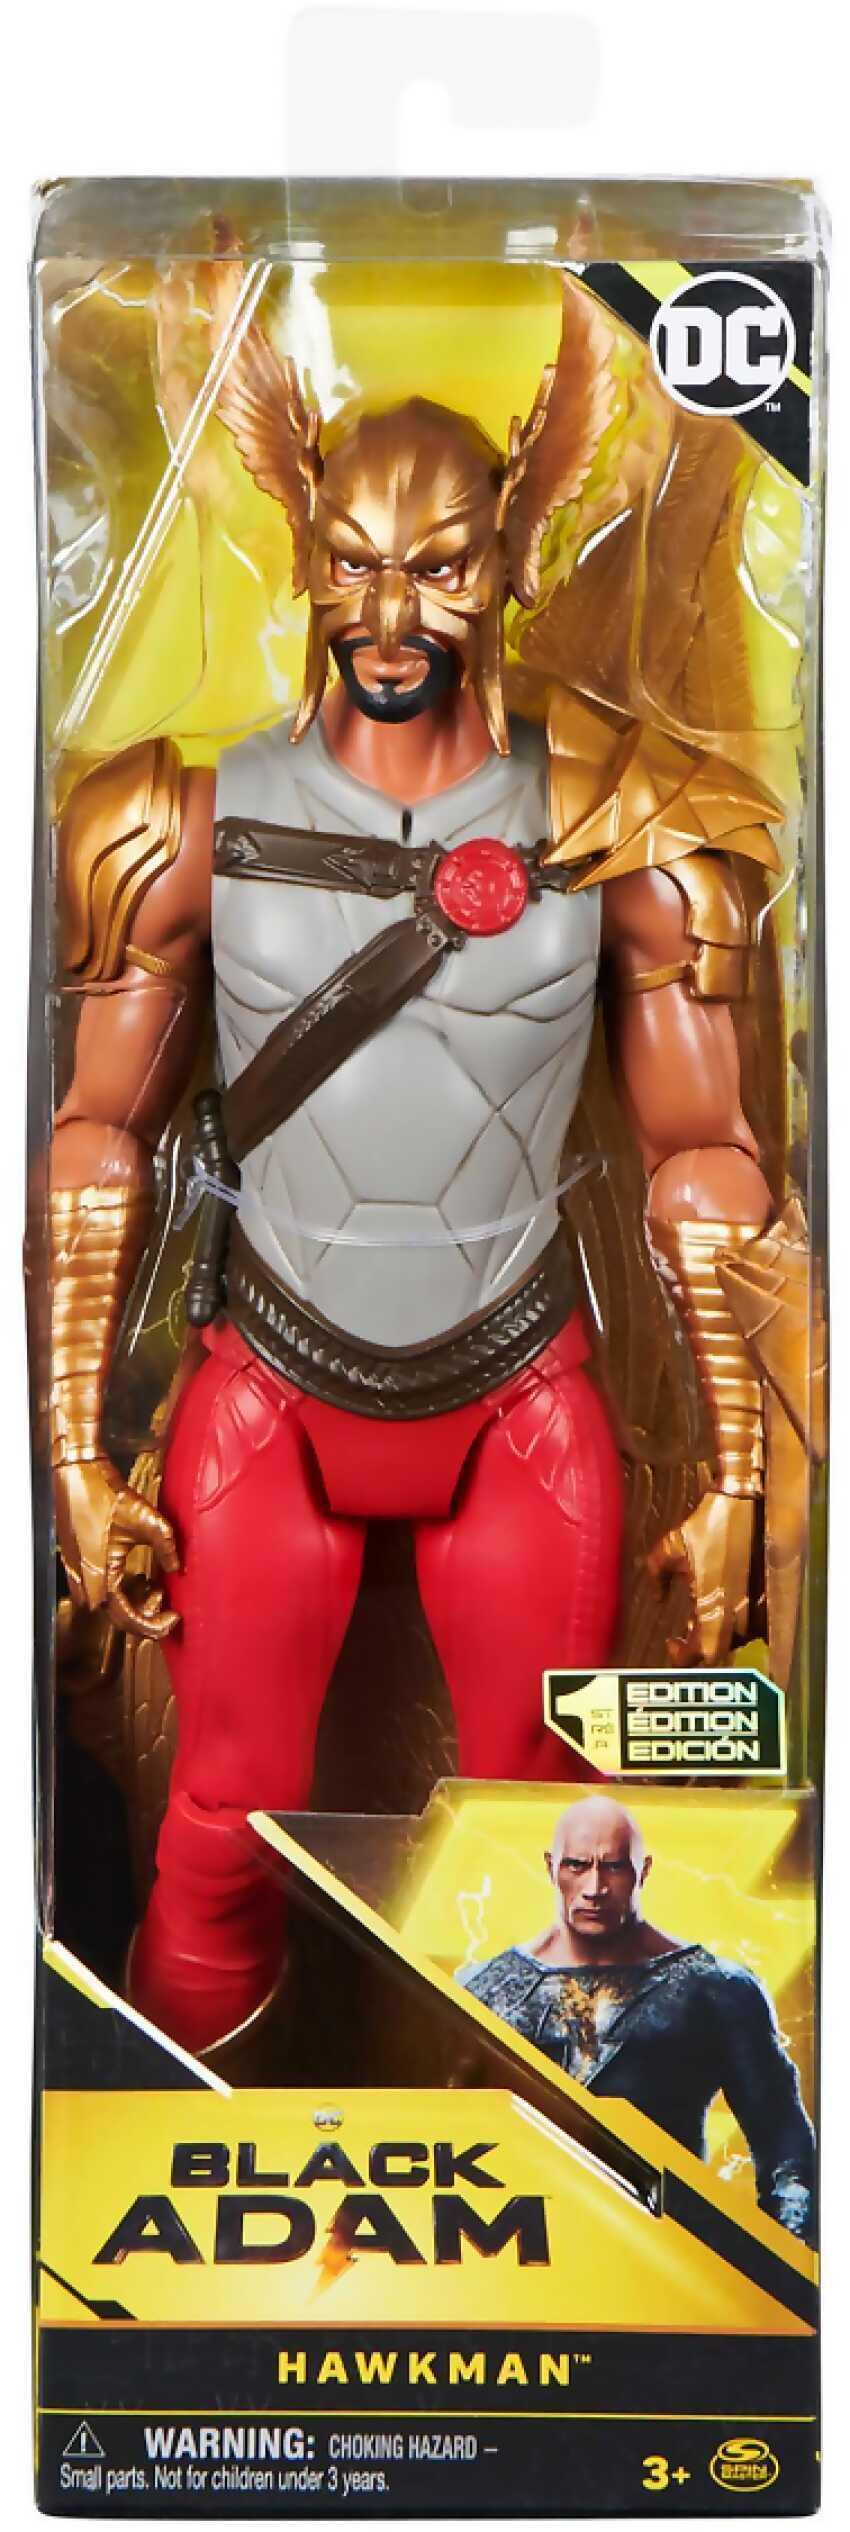 Dc - Hawkman 12-inch Action Figure Black Adam Movie Collectible Kids Toys For Boys And Girls Ages 3 And Up